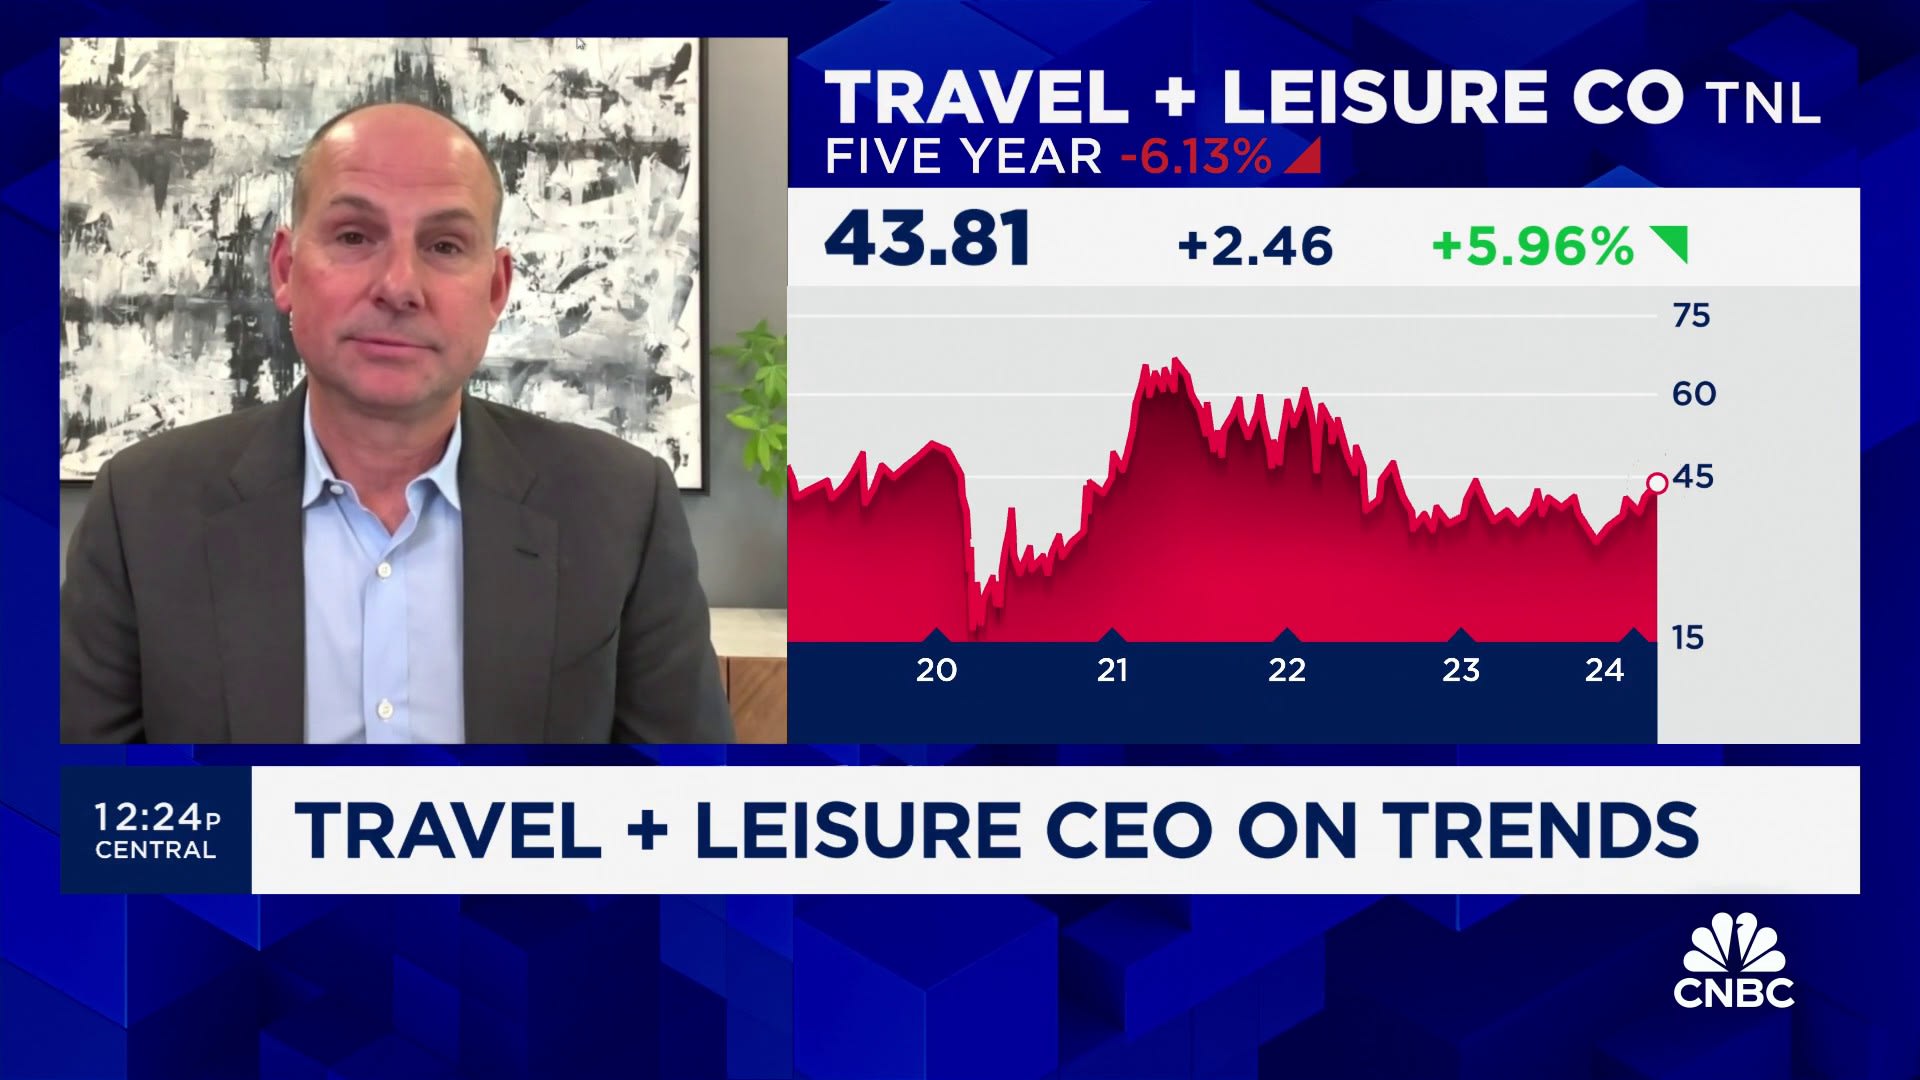 Journey + Leisure CEO Mike Brown discusses customer vacation trends